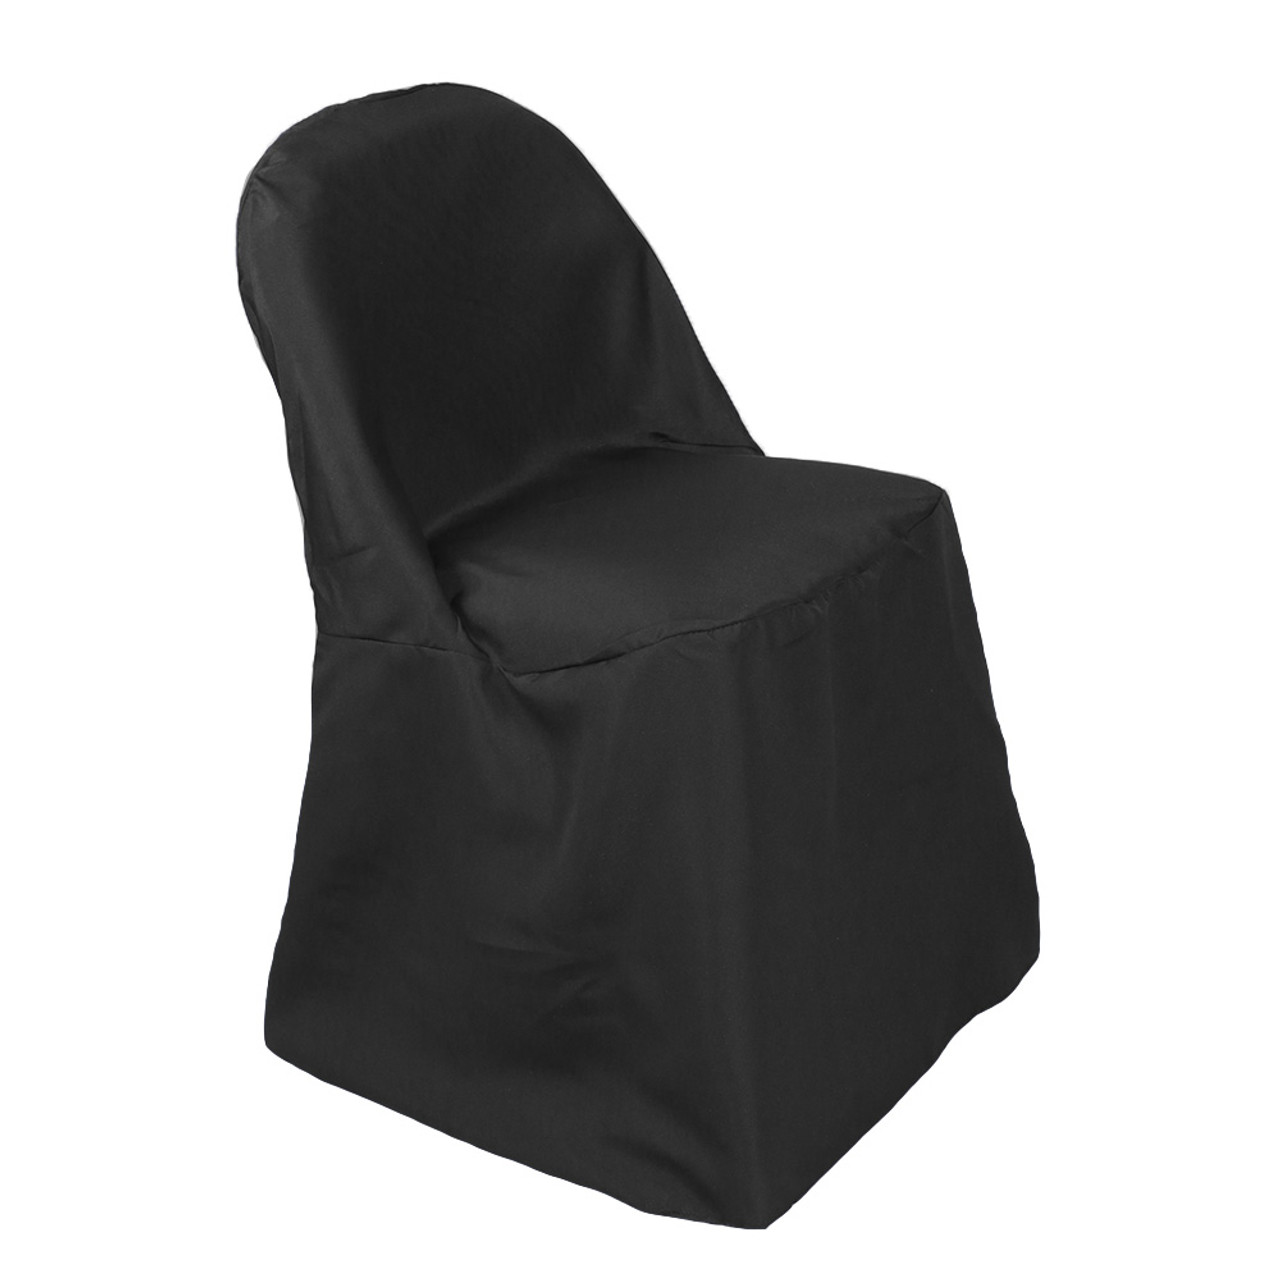 Polyester Folding Chair Cover Black Default  60609.1580321312 ?c=2